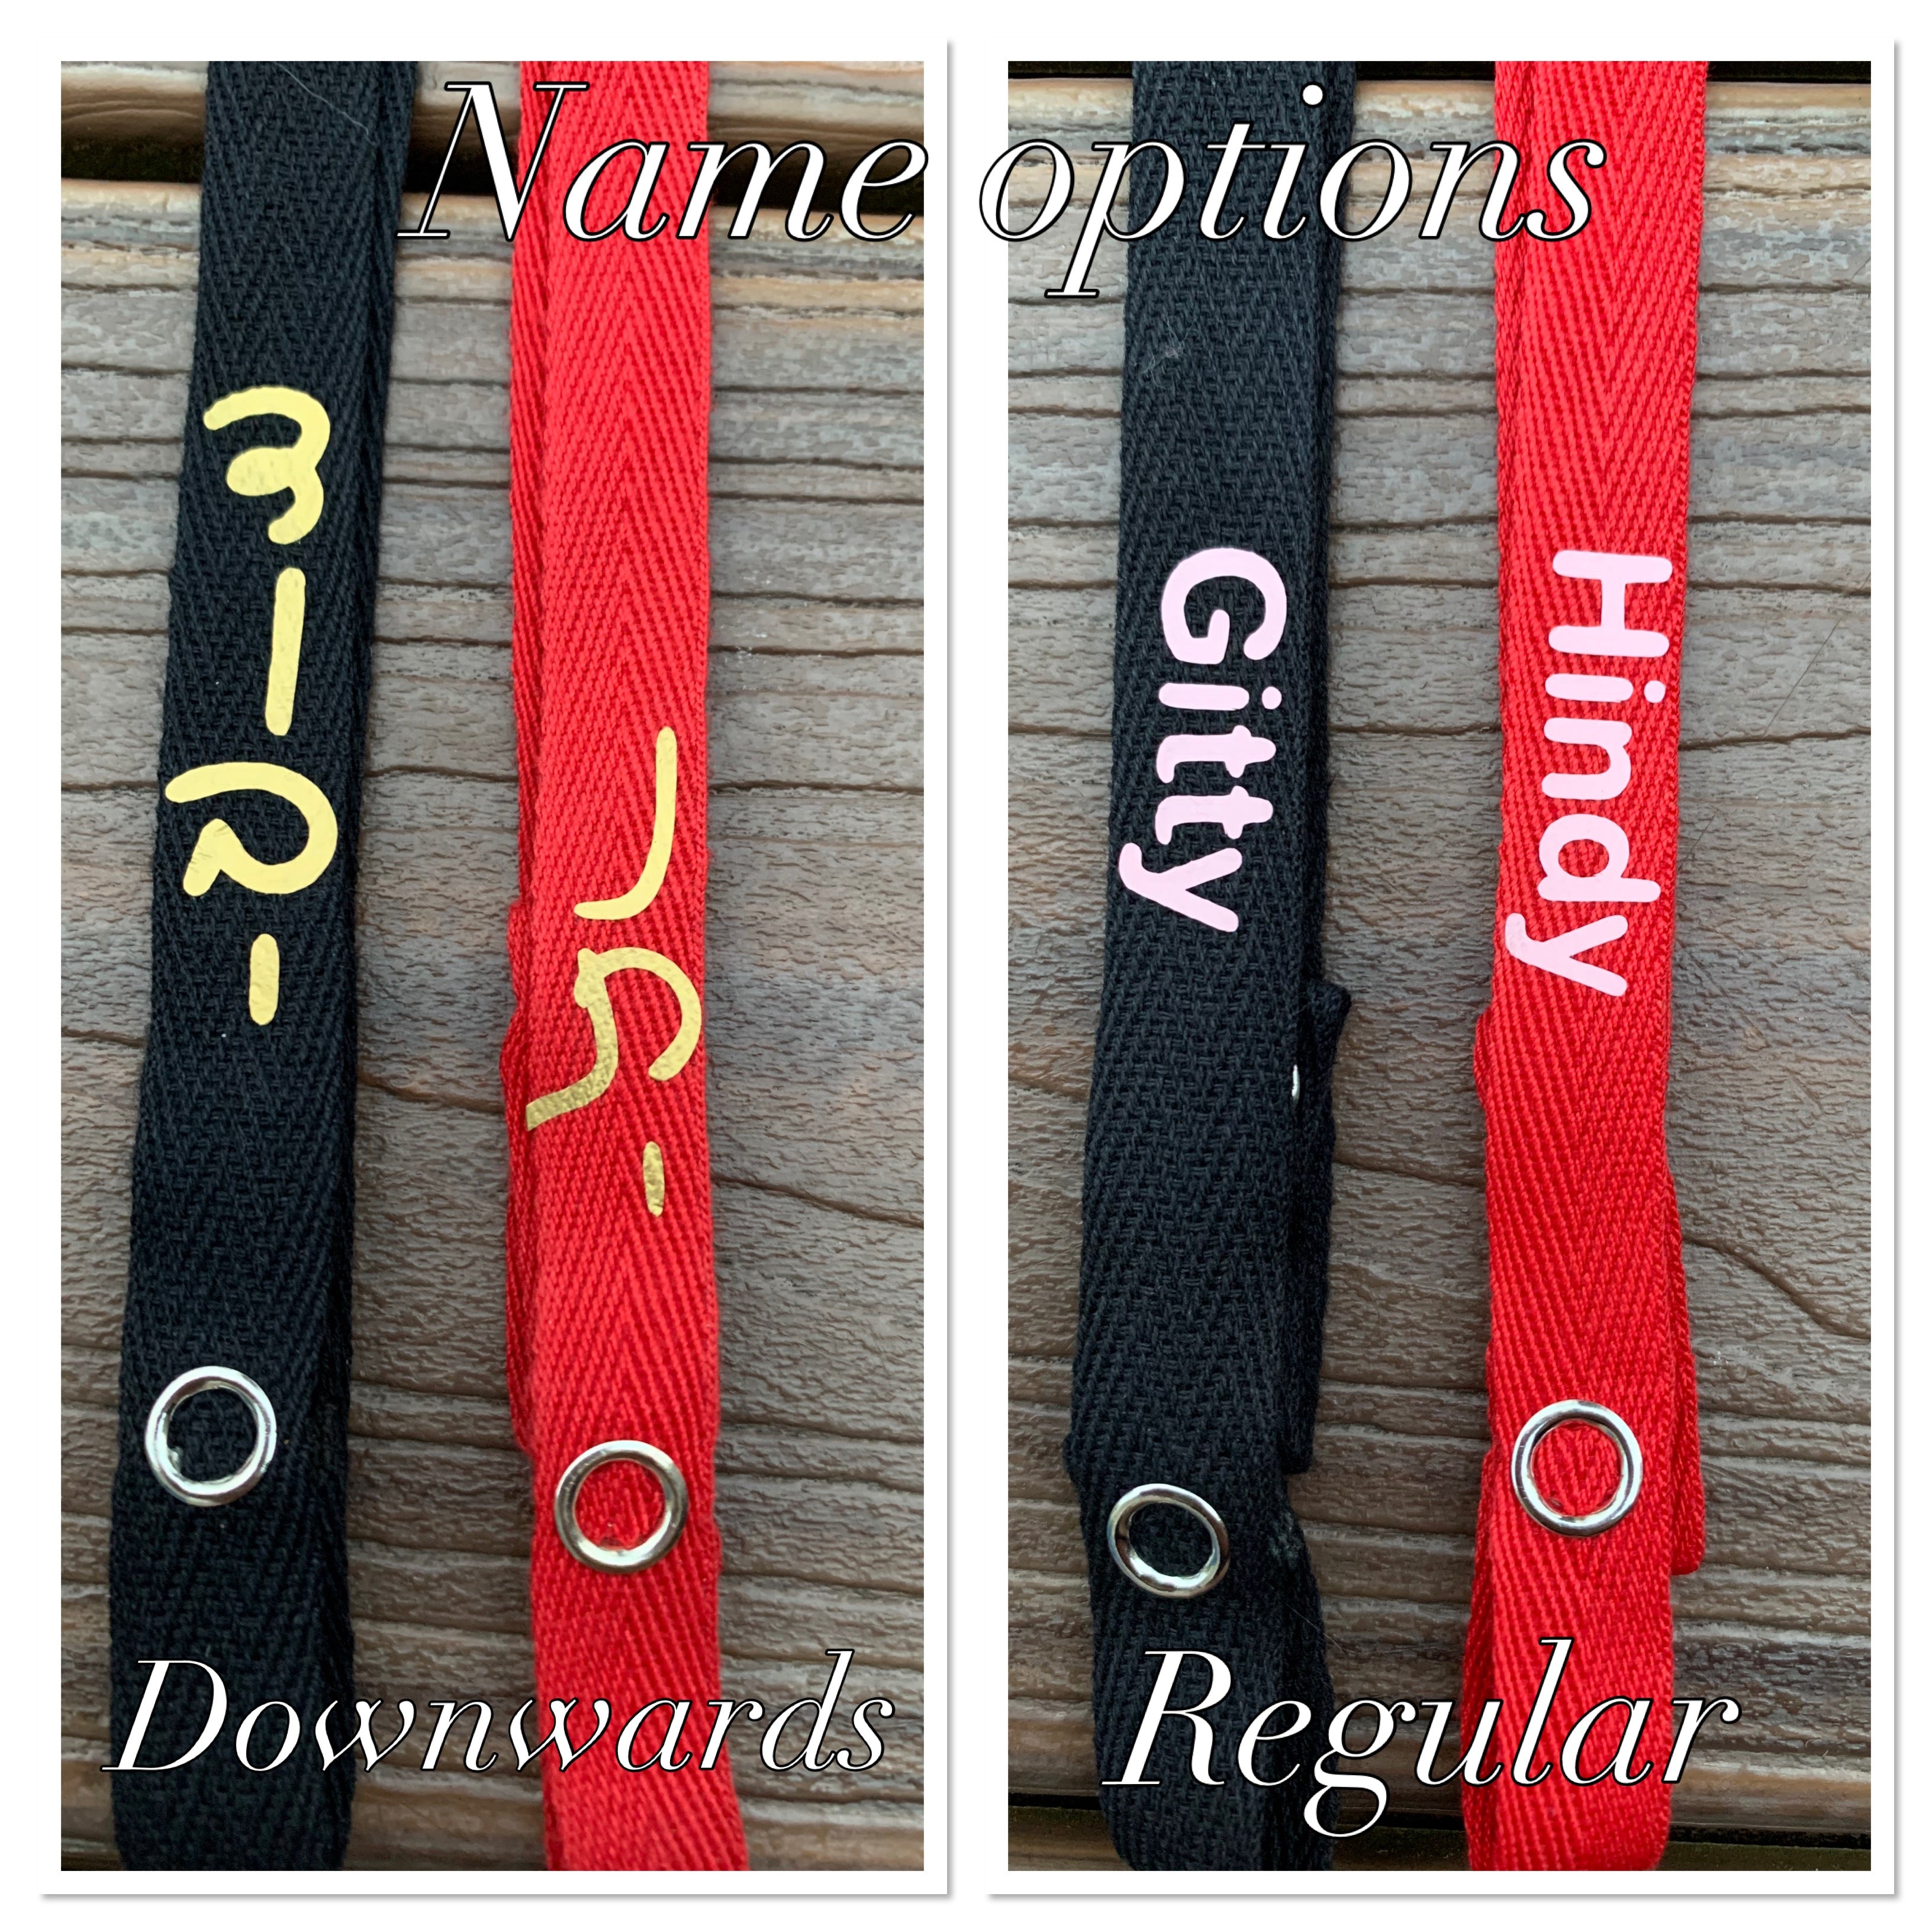 Designer inspired Mask Holders/ Strings / Ribbons can be personalized